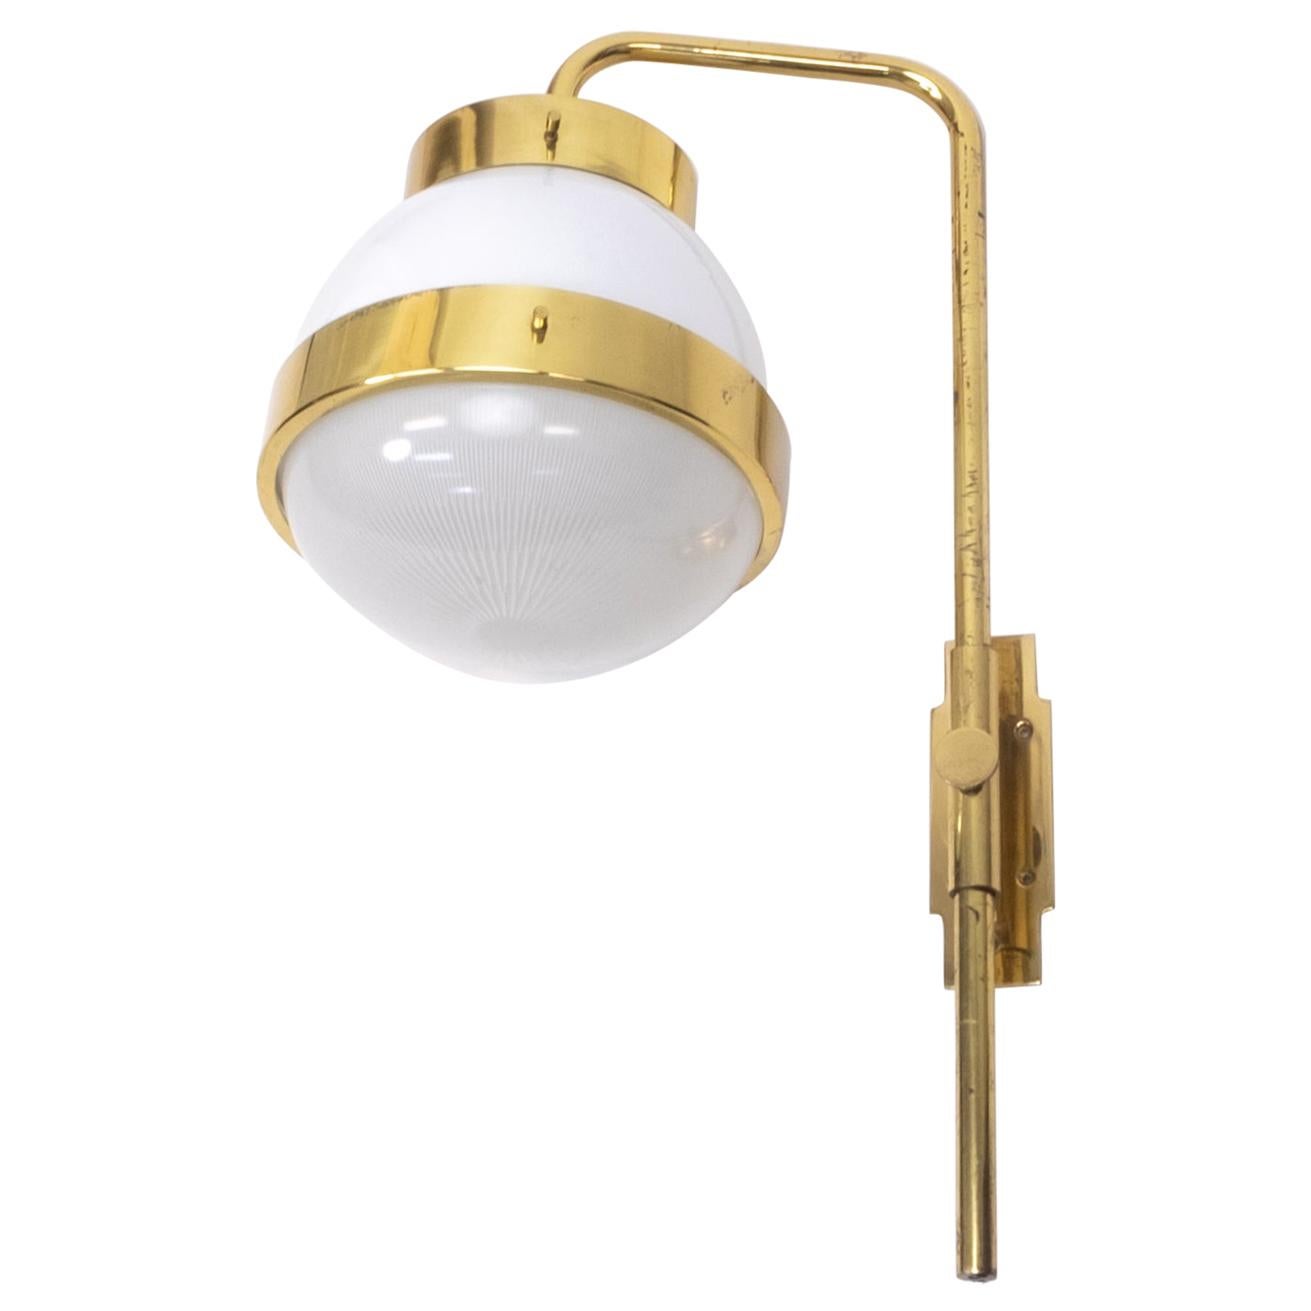 Italian Design Vintage Brass Wall Lamp by Sergio Mazza, 1960s For Sale